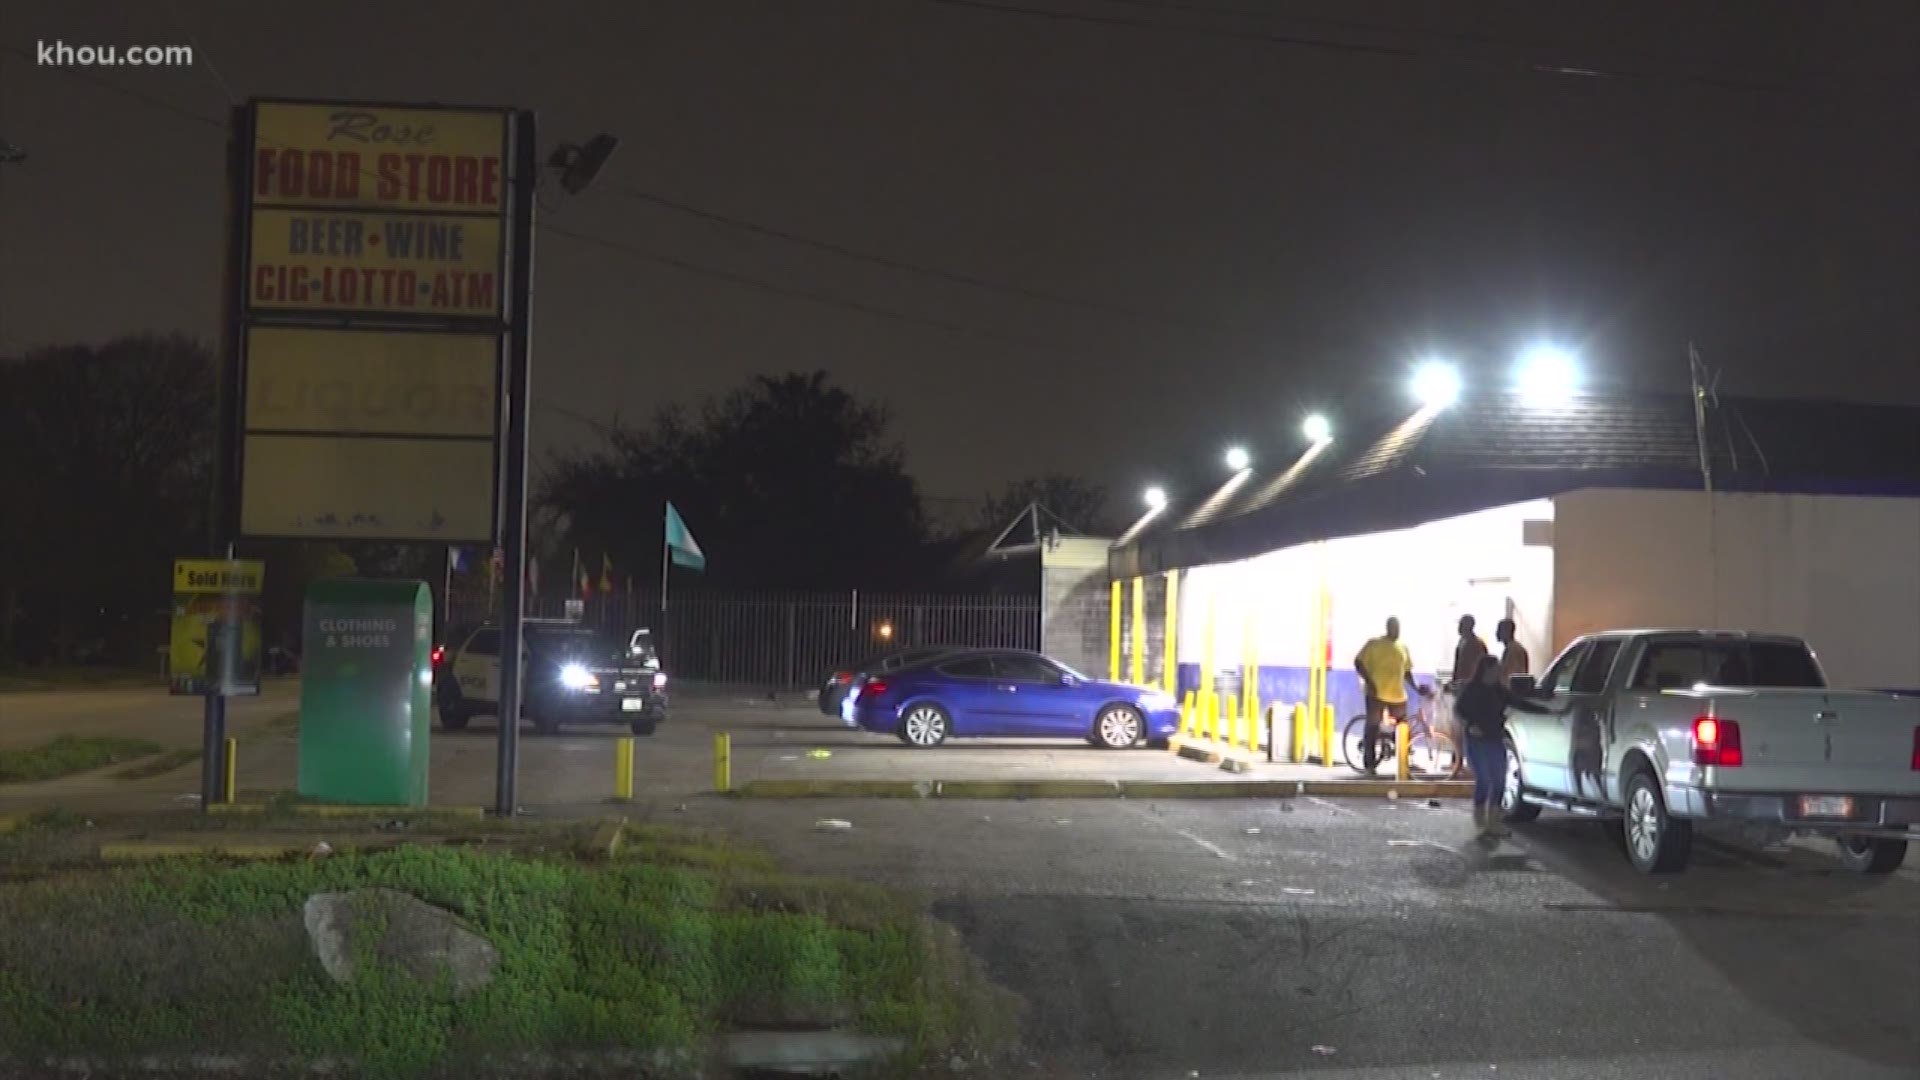 Houston police are looking for the suspect who shot and killed a man during a fight outside a store in Houston's northside.